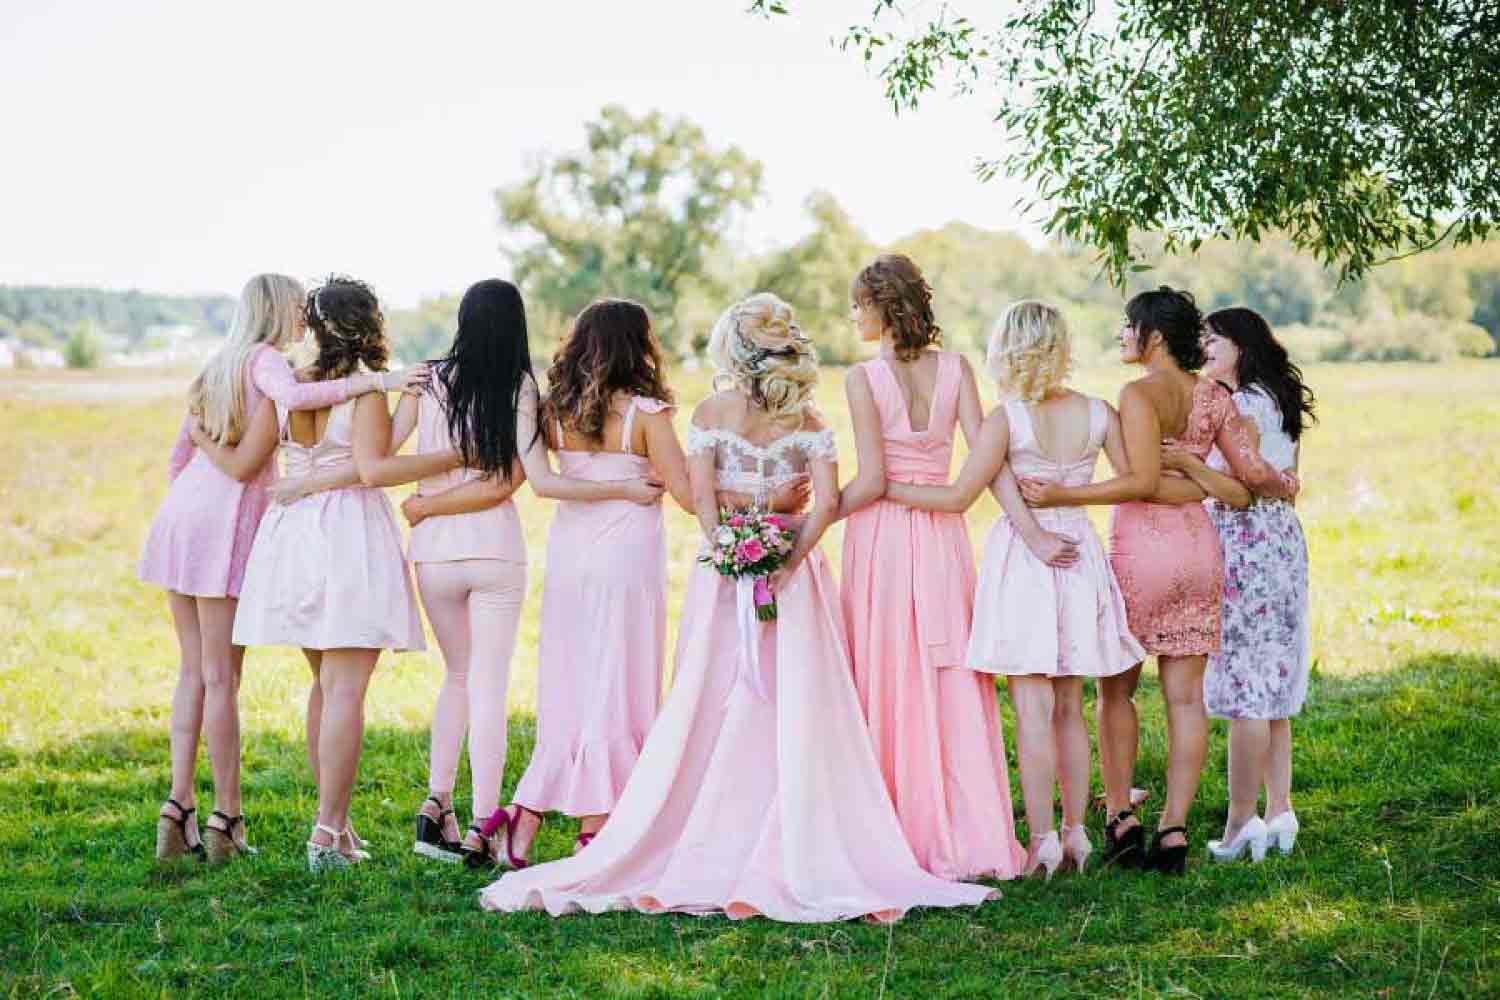 Photo of the back of a line with a bride surrounded by bridesmaids dressed in pink out in a field.